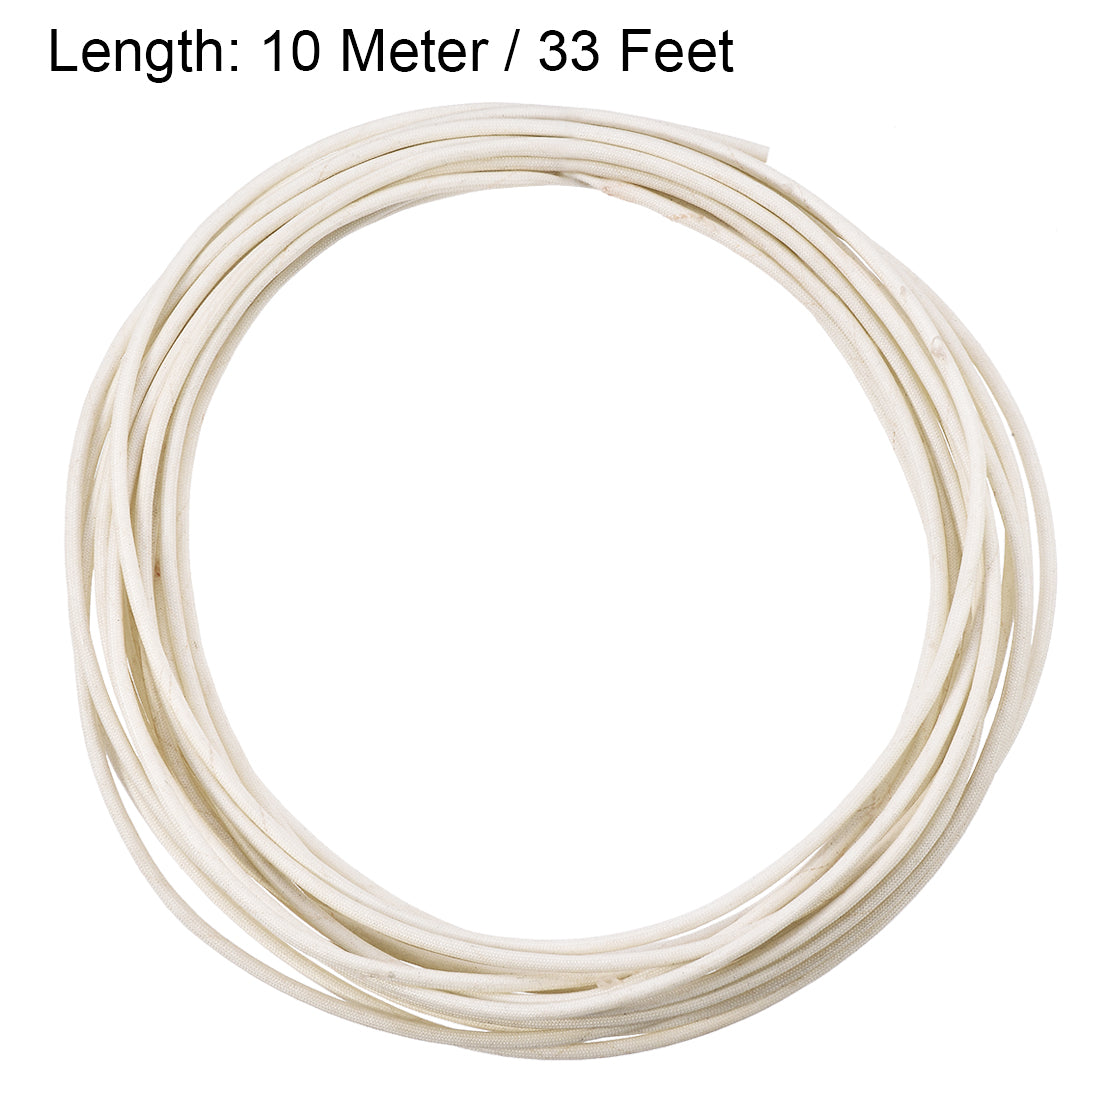 uxcell Uxcell Insulation Cable Protector,33Ft-2.5mm High TEMP Silicone Fiberglass Sleeve White